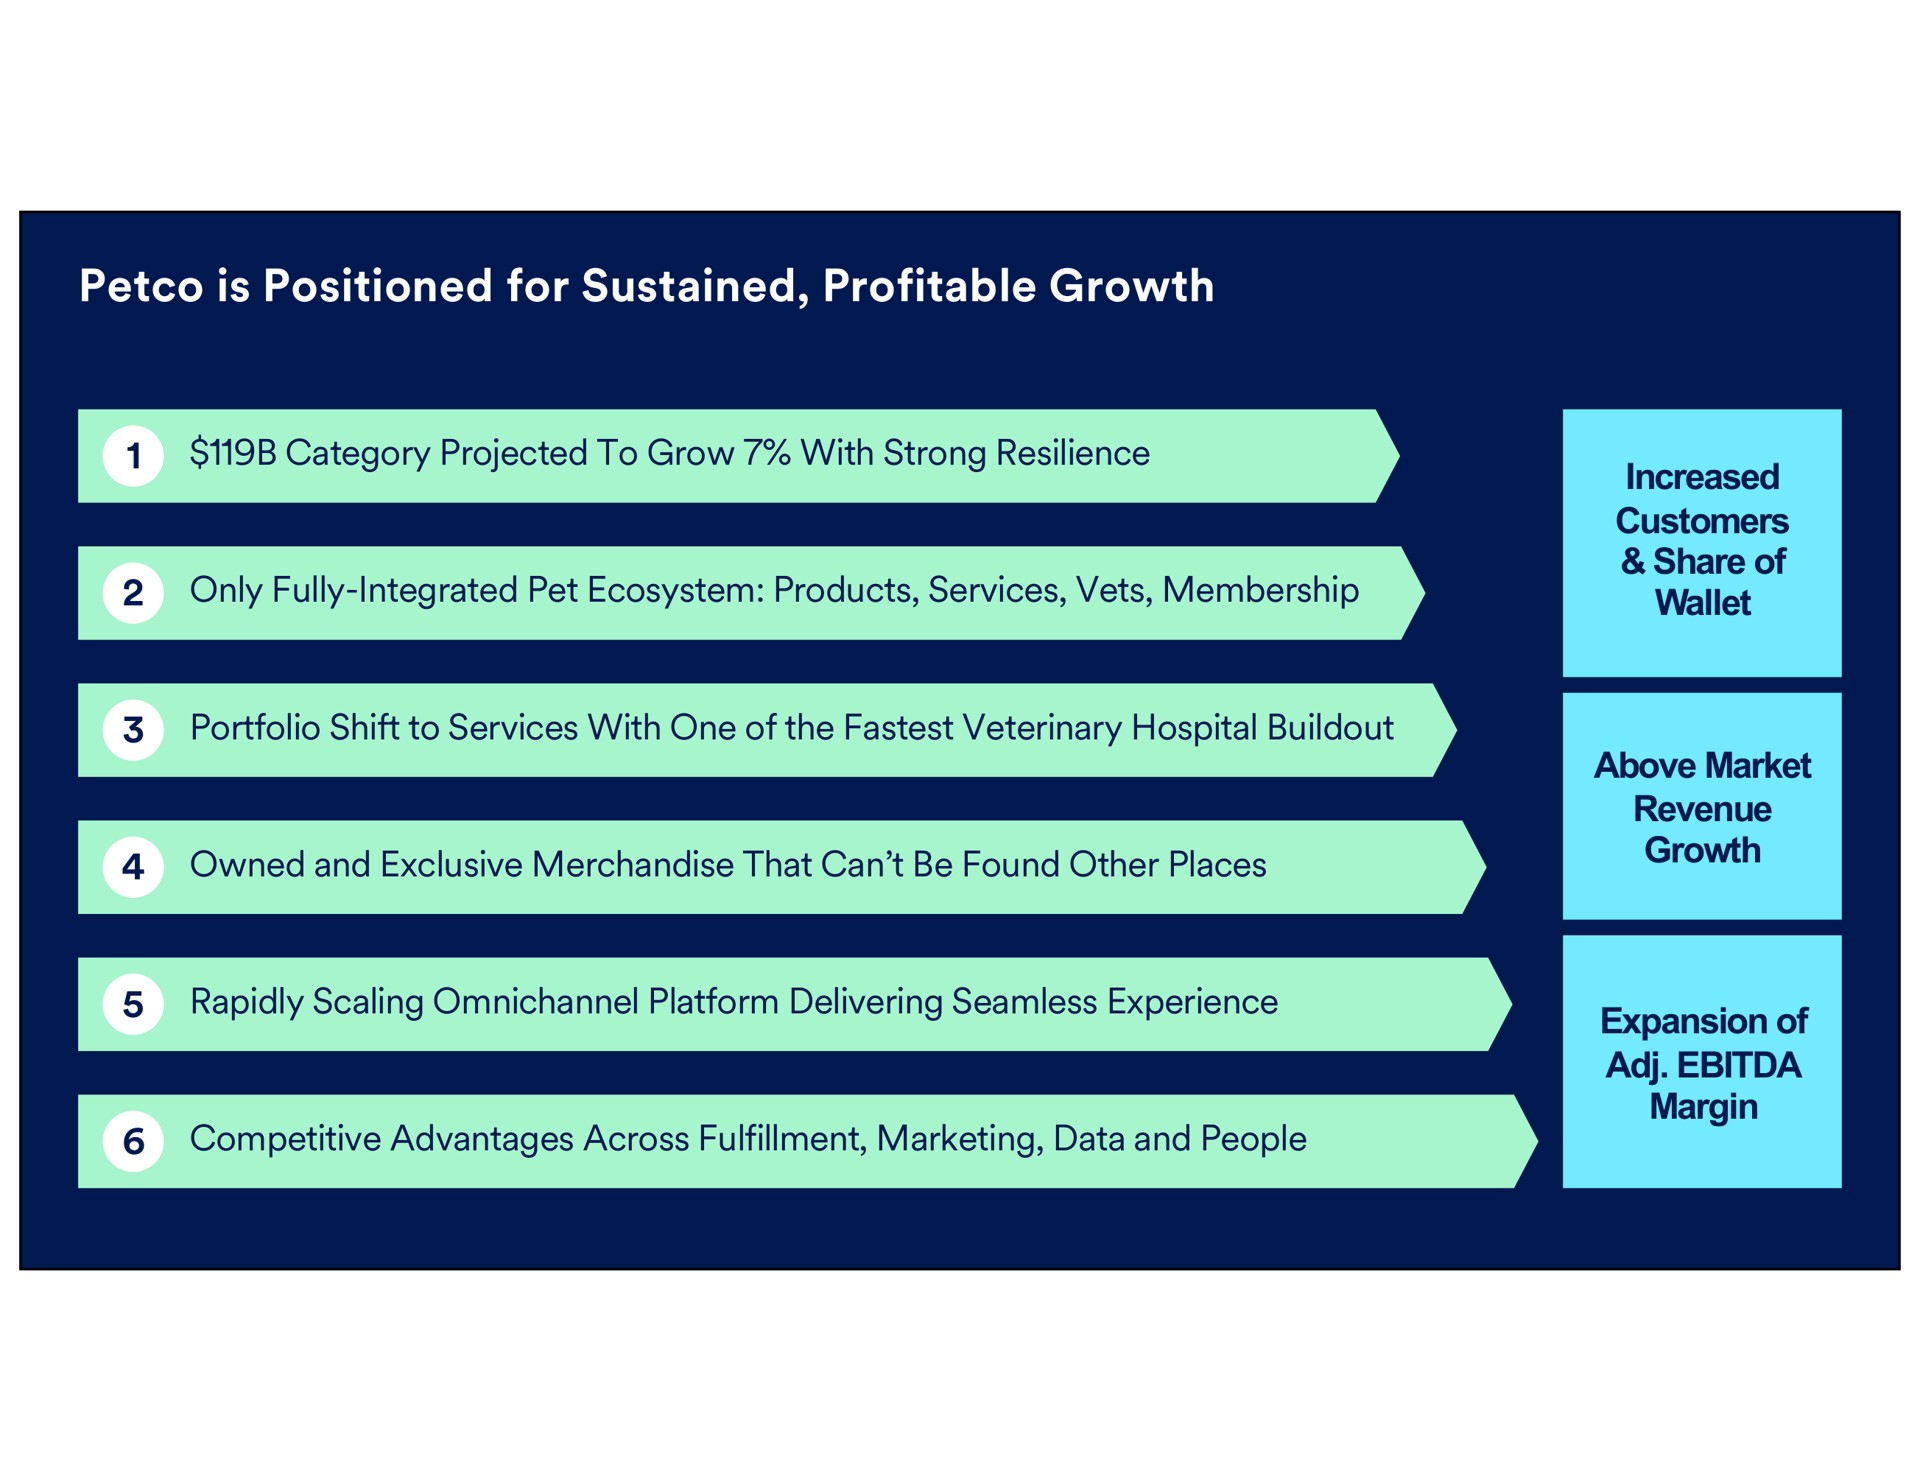 is positioned for sustained profitable growth category projected to grow with strong resilience only fully integrated pet ecosystem products services vets membership portfolio shift to services with one of the veterinary hospital increased customers share of wallet owned and exclusive merchandise that can be found other places competitive advantages across fulfillment marketing data and people rapidly scaling platform delivering seamless experience above market revenue margin expansion of | Petco